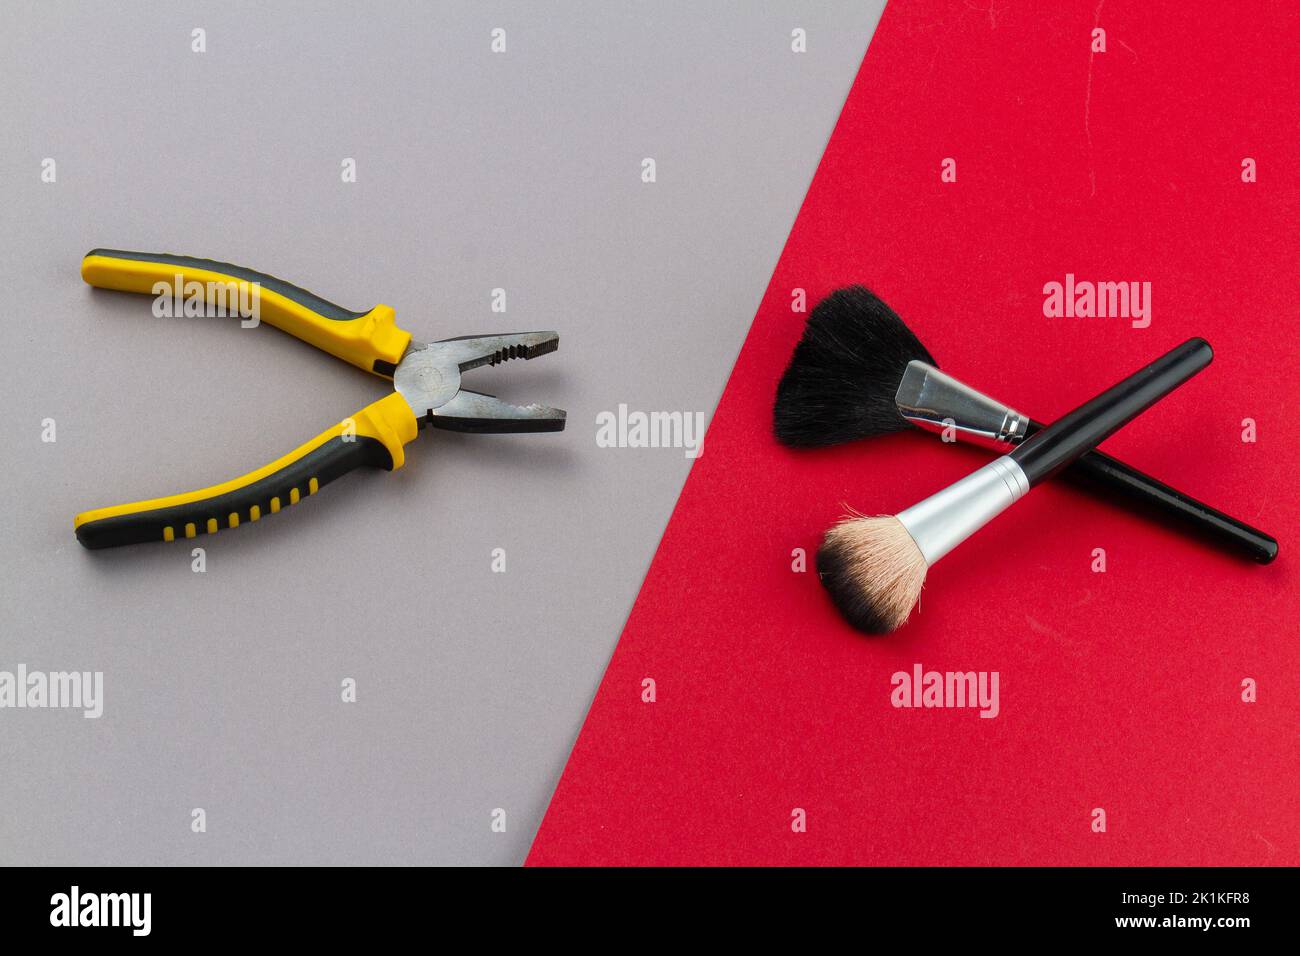 Top view pliers and two makeup brushes. Man versus woman concept. Stock Photo